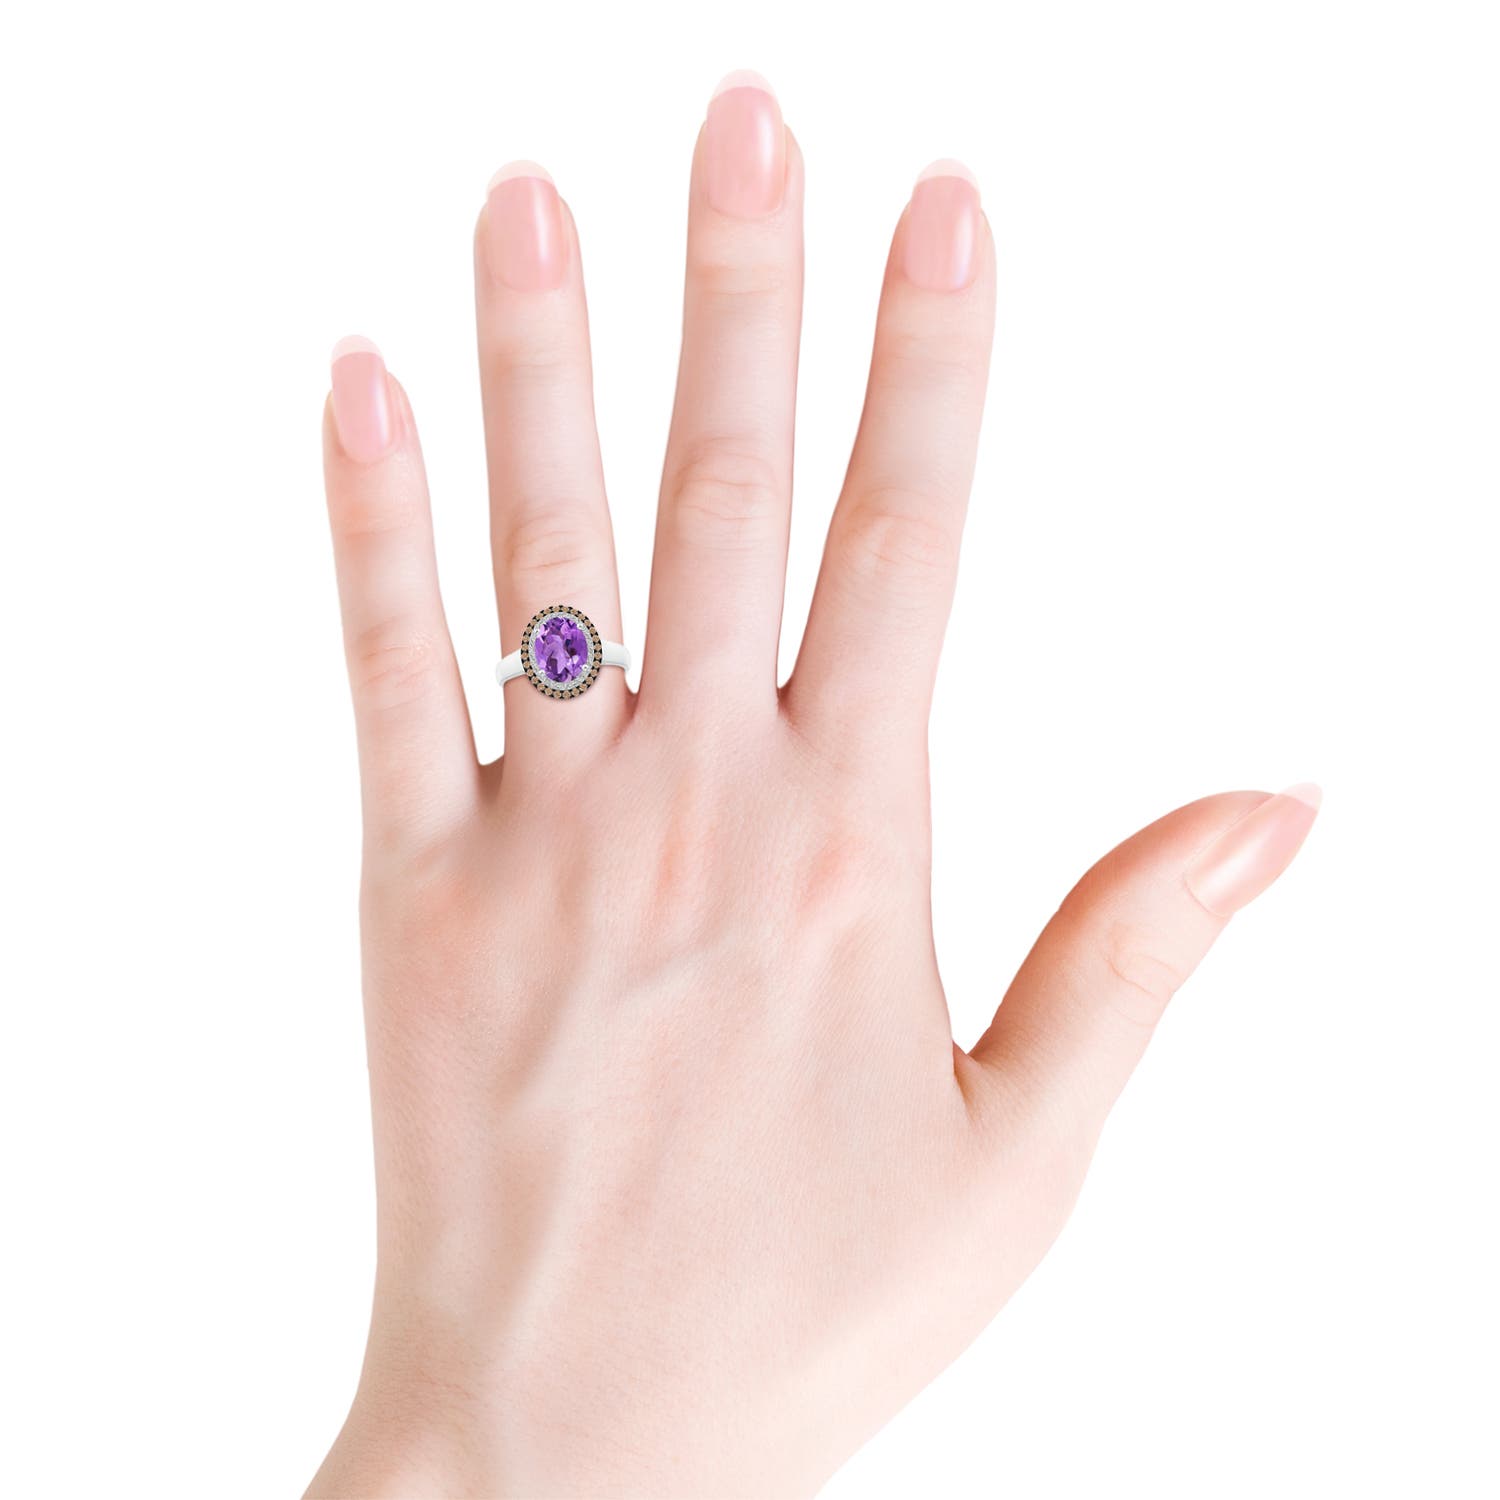 AA - Amethyst / 1.87 CT / 14 KT White Gold